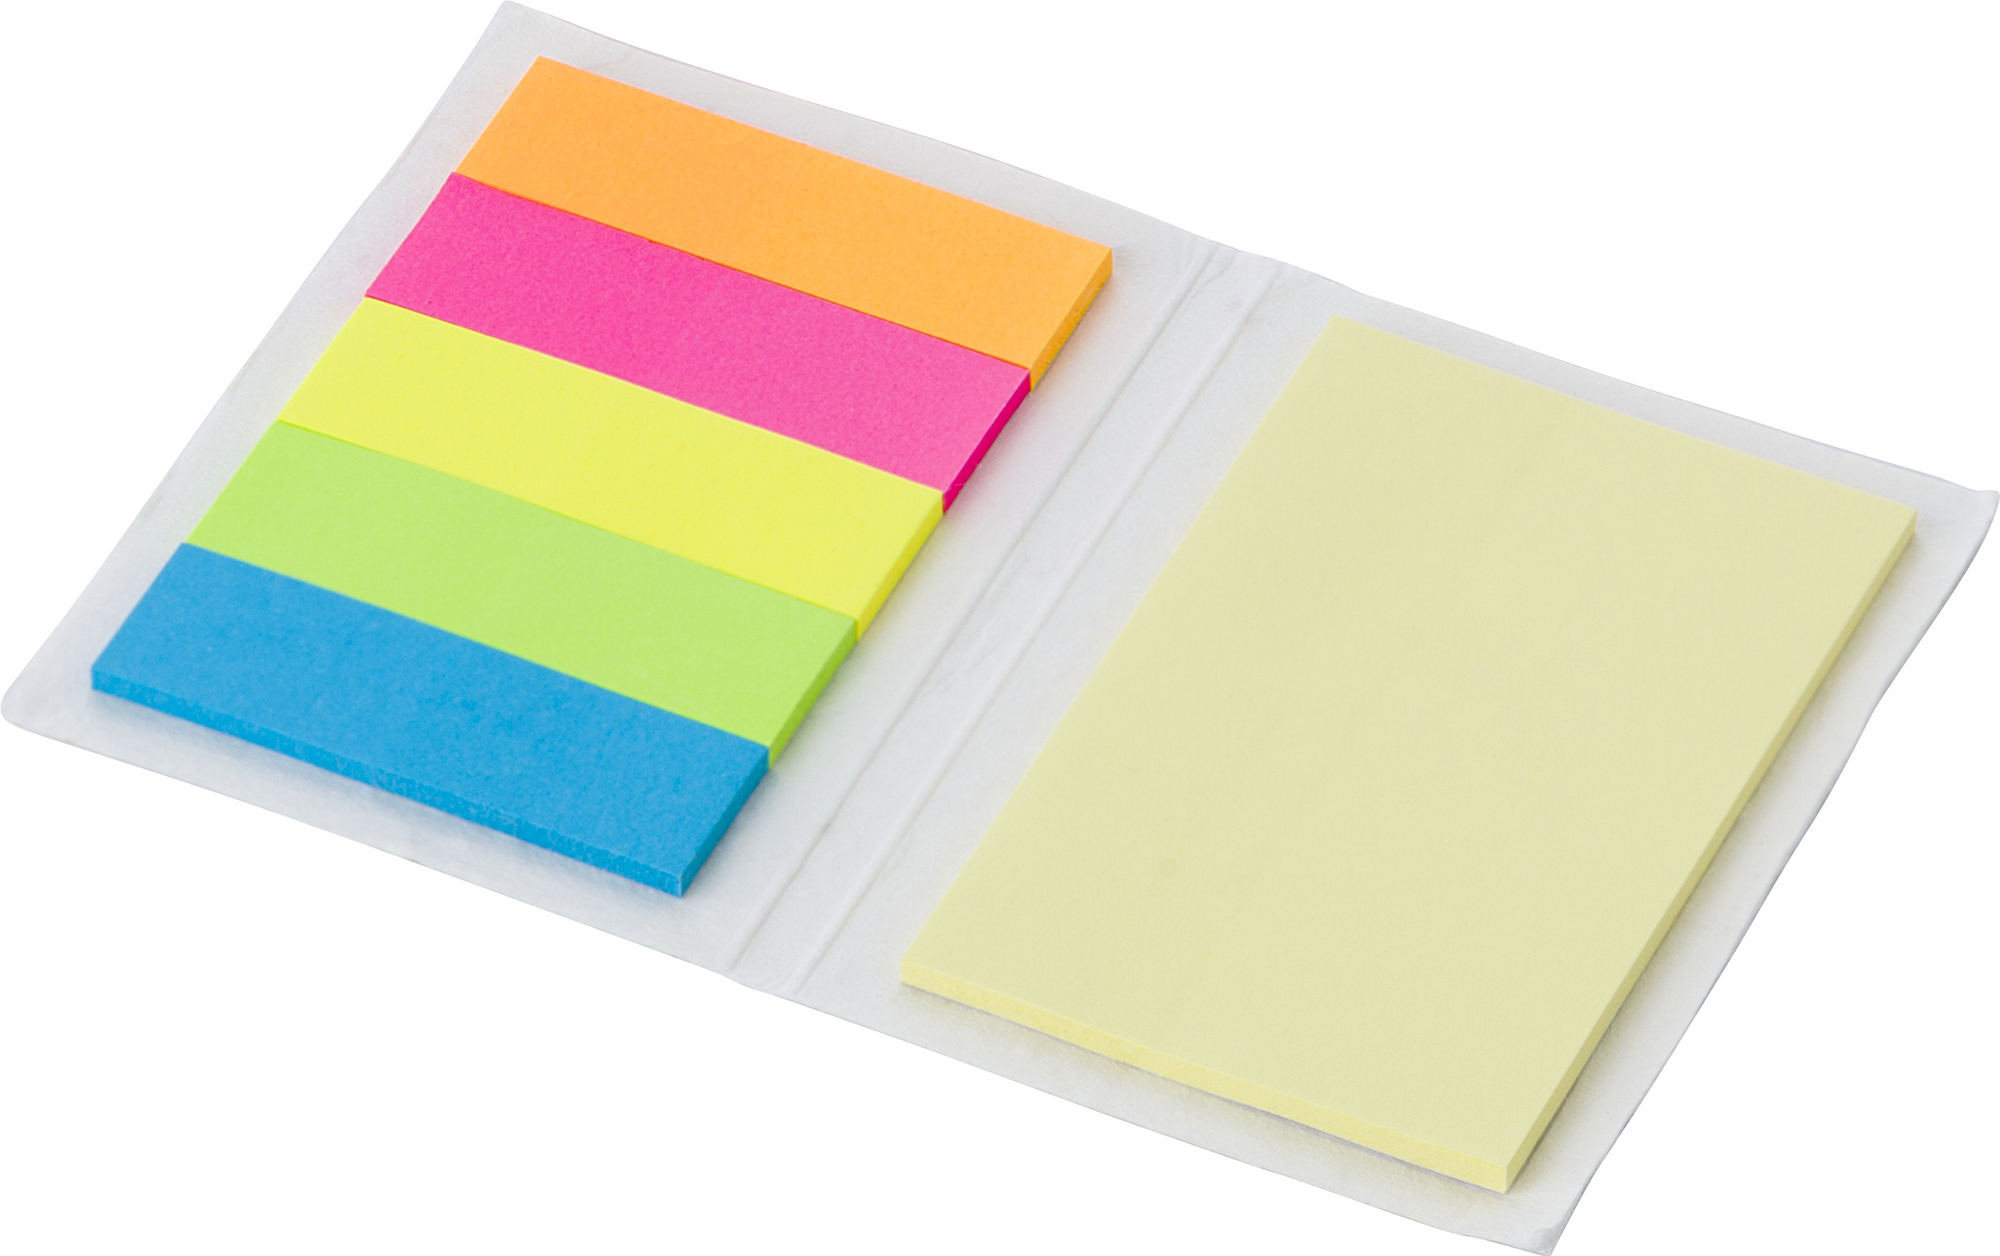 000000864476 002999999 3d045 ins pro01 2022 fal - Seed paper sticky notes